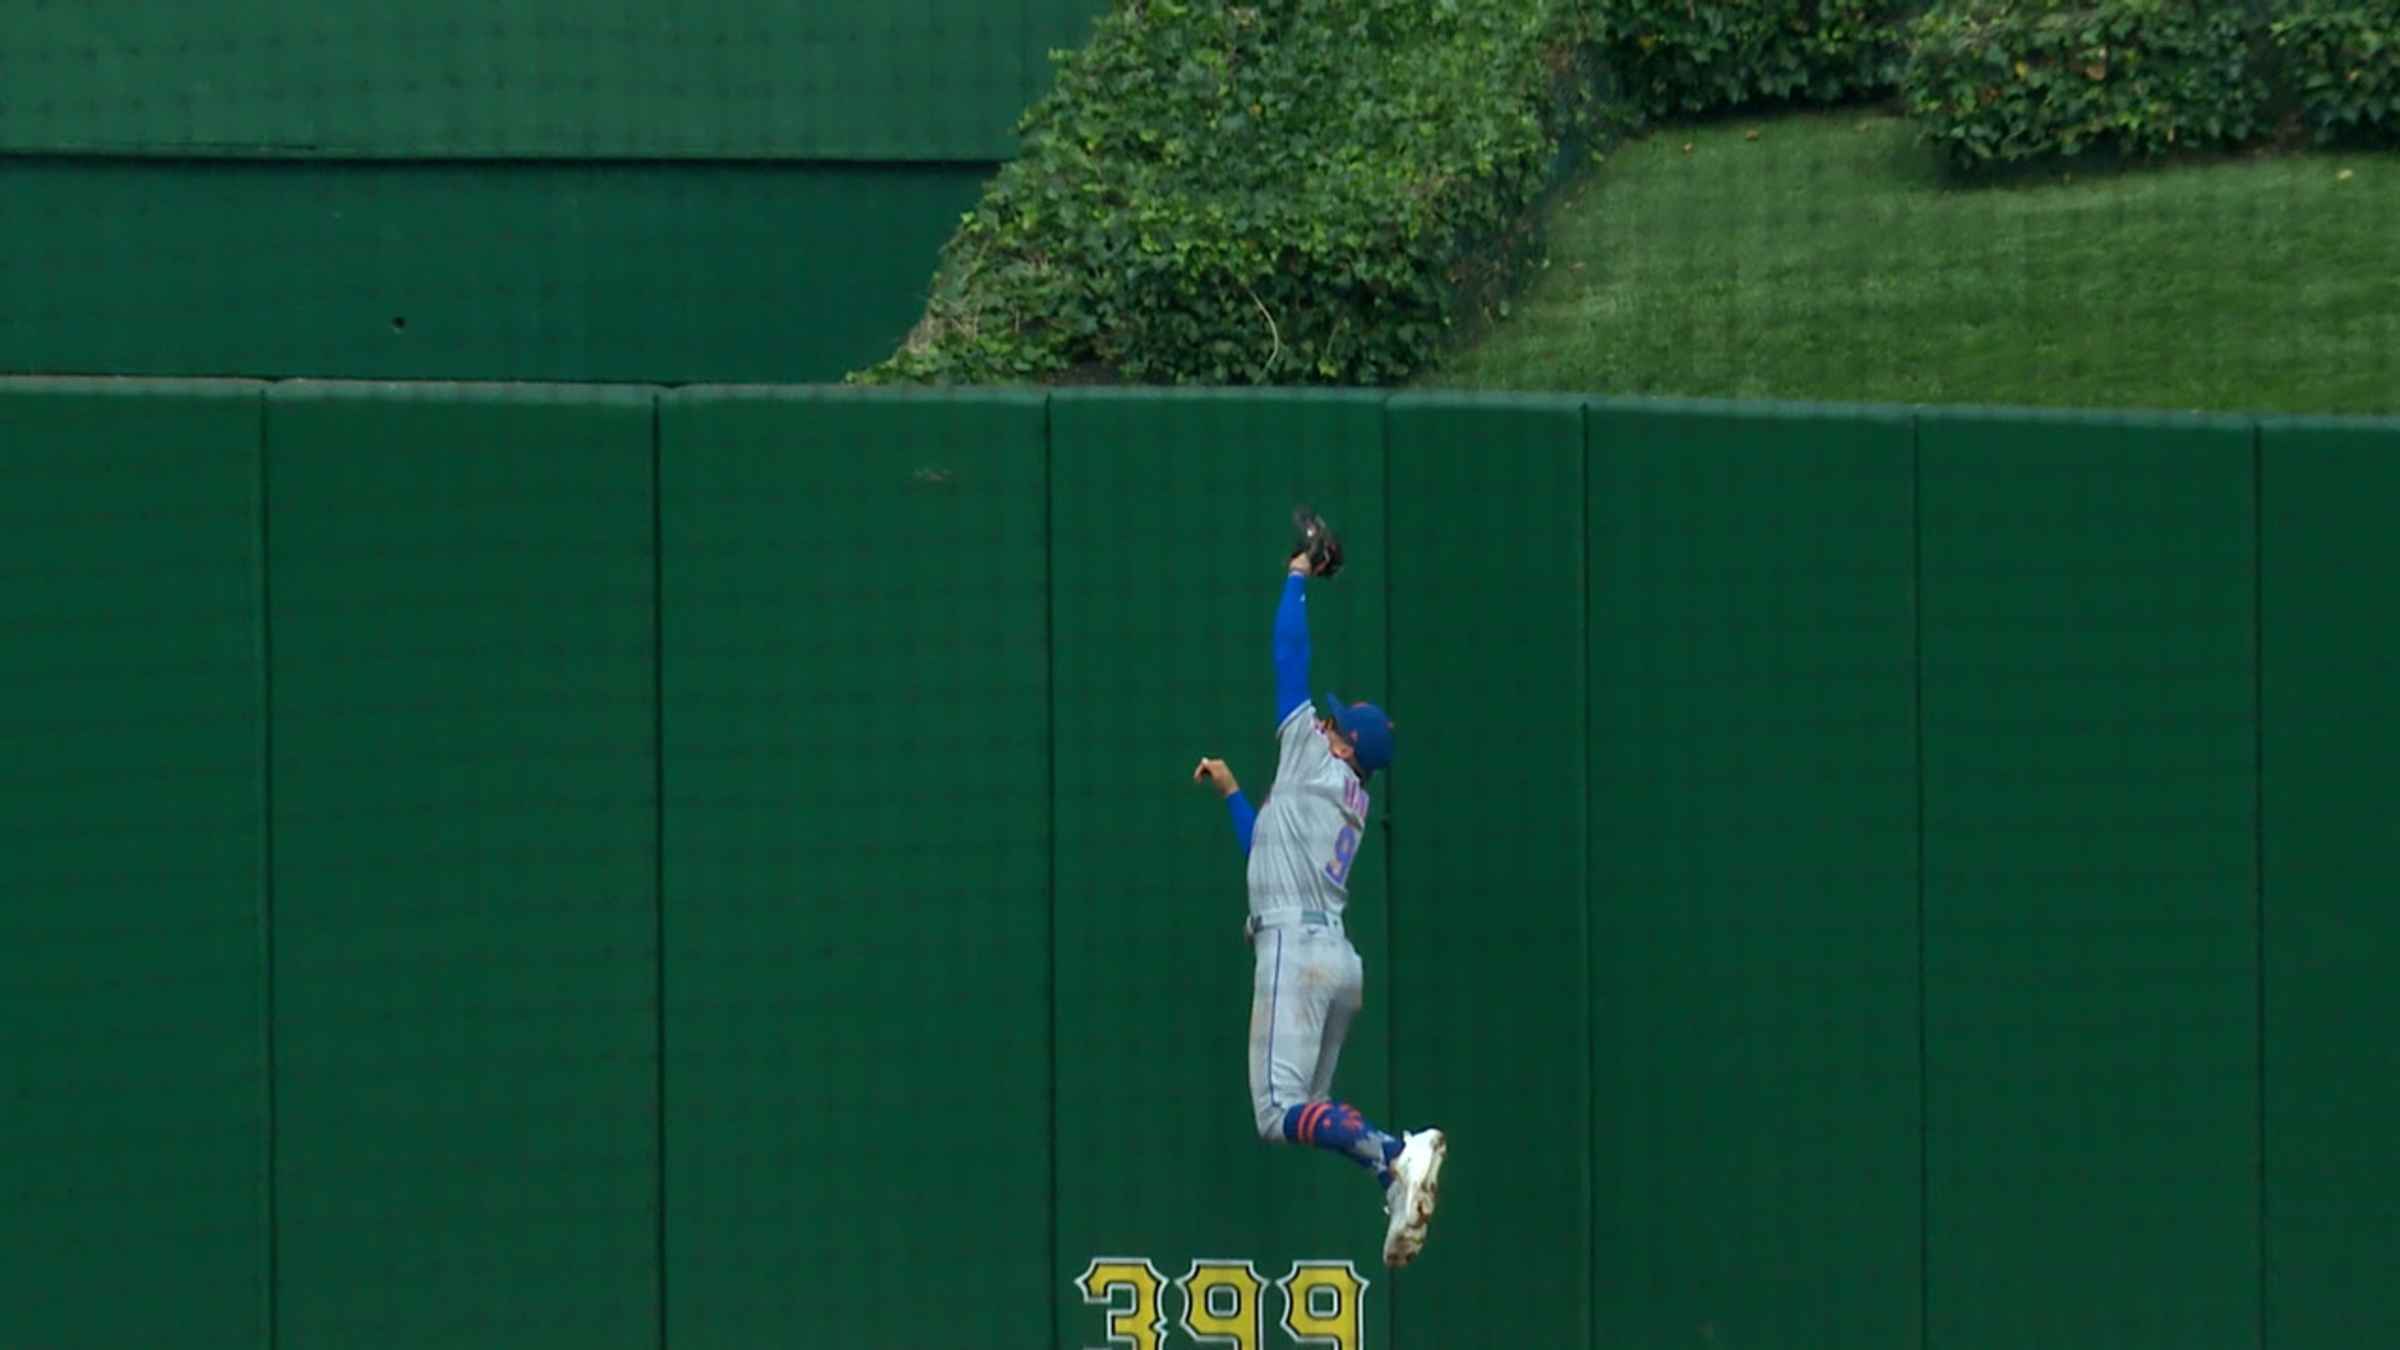 Mets' Brandon Nimmo Pulls Off Catch of the Year – OutKick